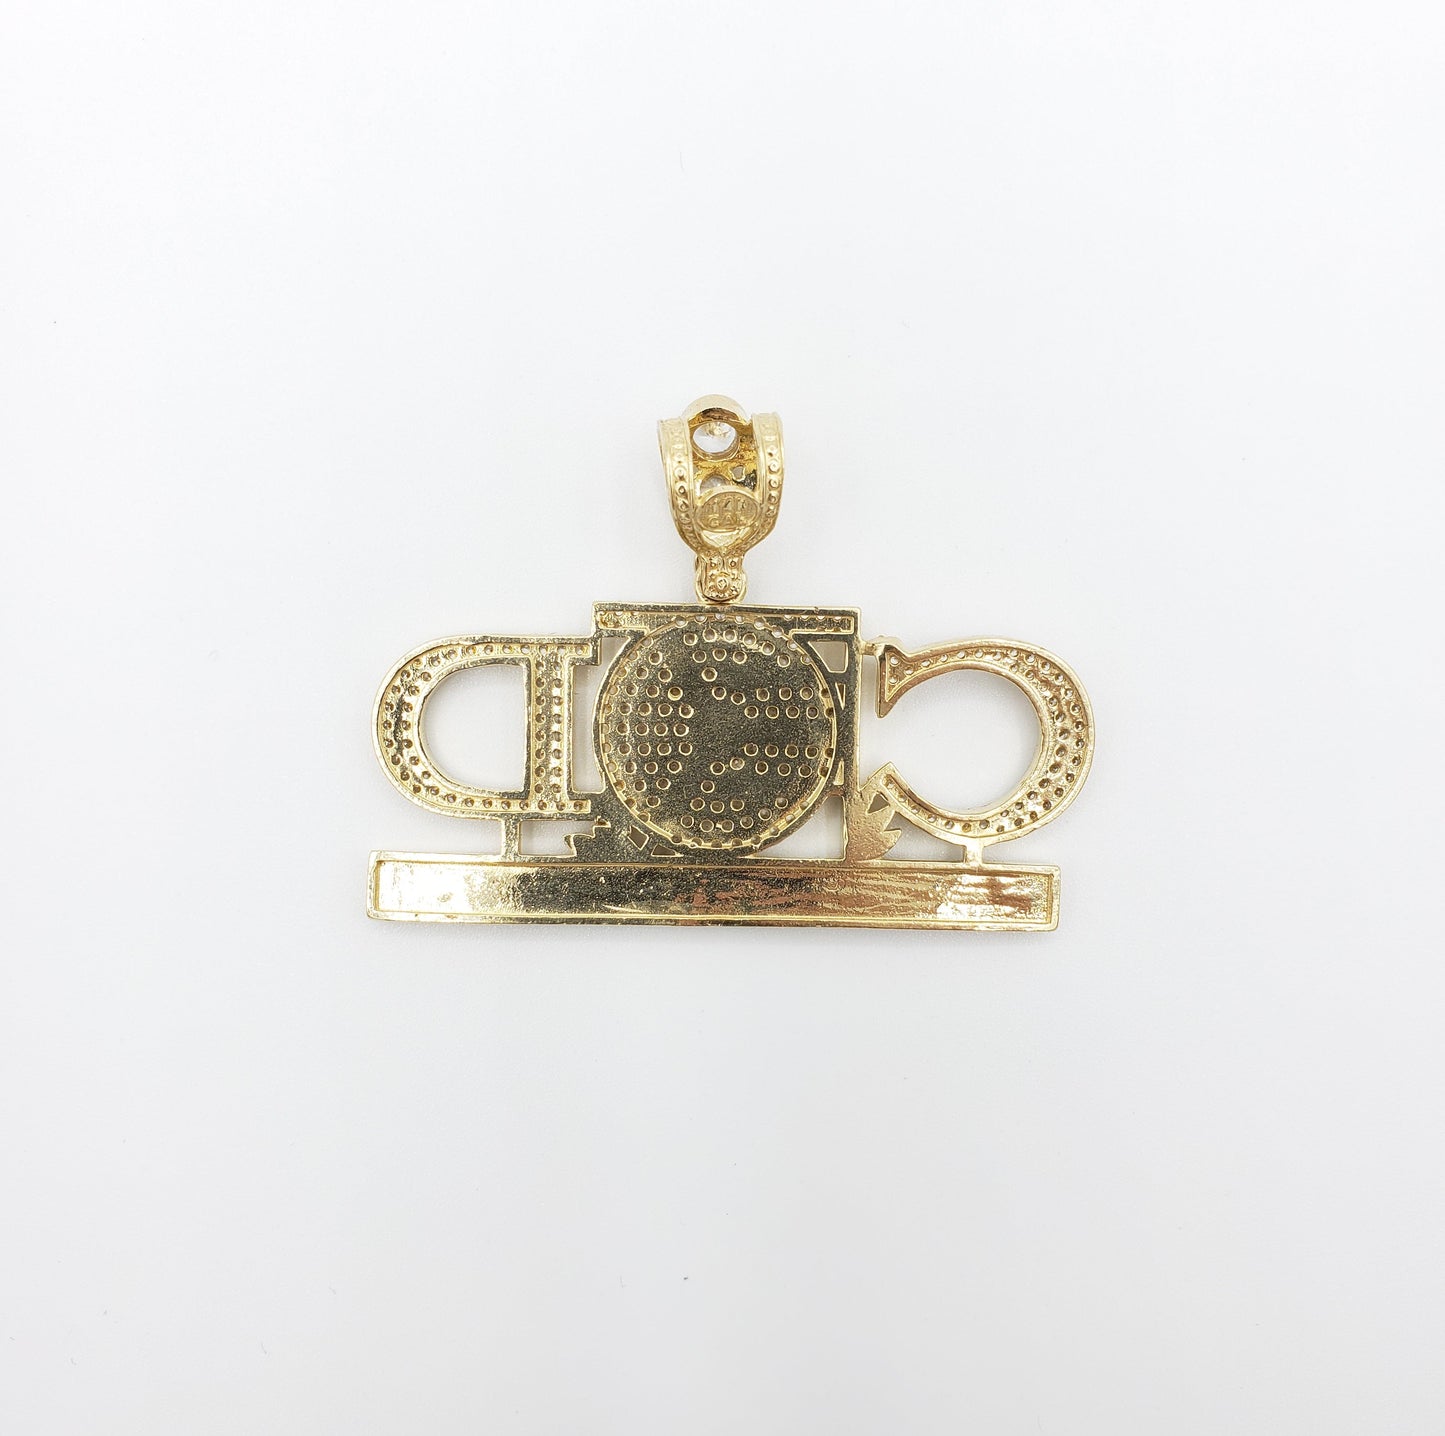 14K Gold- "CASHED OUT DAILY" Pendant